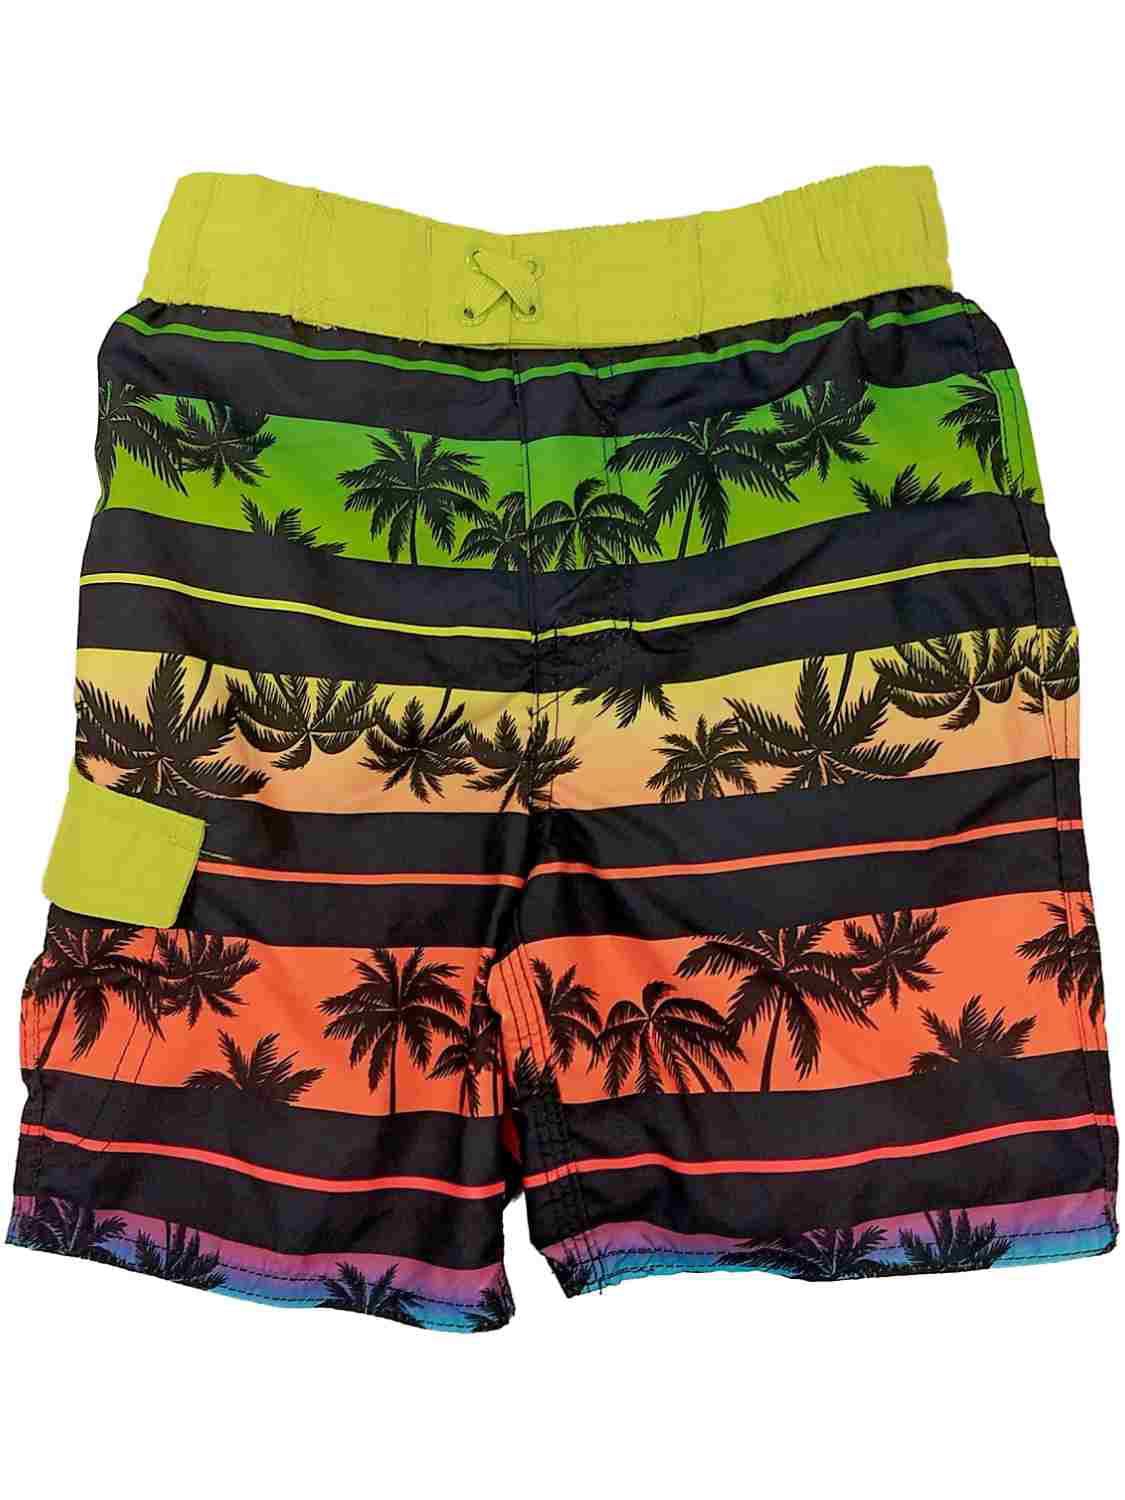 Details about   Boys Size 3T 4T Swim Shorts Trunks Tropical Fish Gray Orange Green 